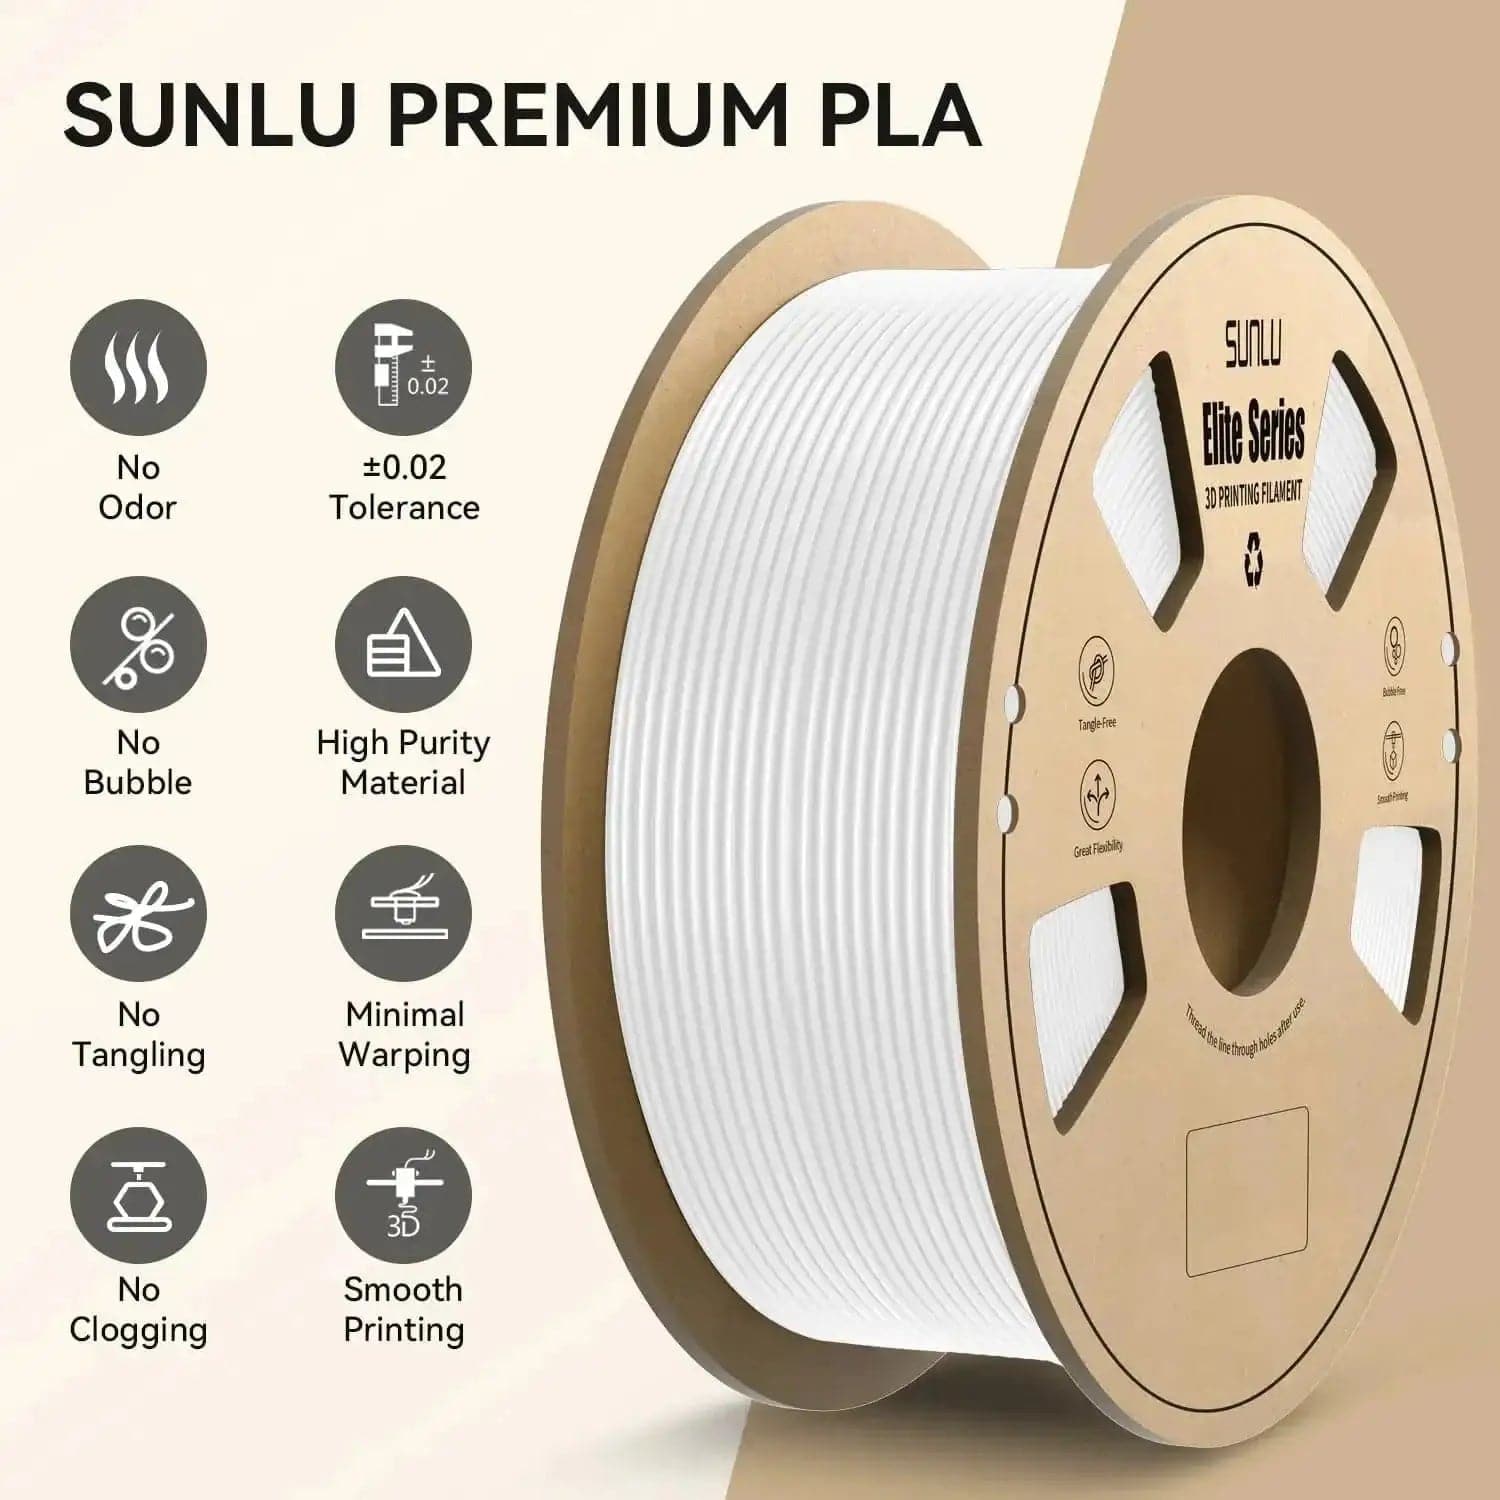 Over 10kg Filament Combo-SUNLU Elite PLA 3D Printer Filament 1.75mm 1K
✅【Ship From Amazon】Same shipping service with Amazon. Enjoy reliable performance and fast shipping with the Amazon FBA Warehouse.
✅【SUNLU PLA Filament 1.75mm】Dimens10kg Filament Combo-SUNLU Elite PLA 3D Printer Filament 13D Printing Materials